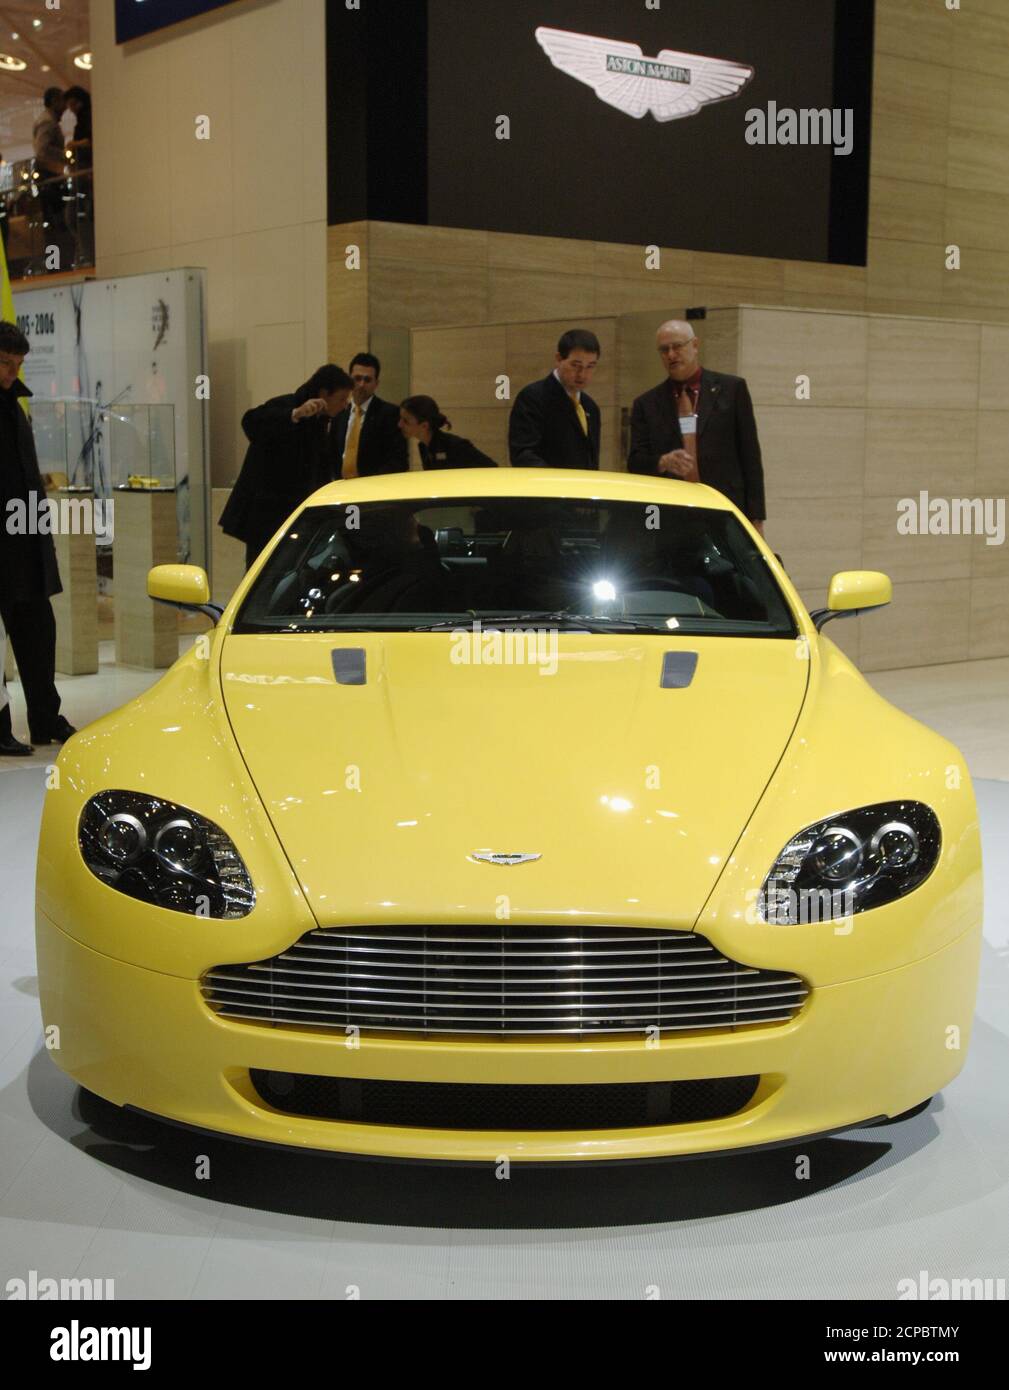 The Aston Martin V8 Vantage is on display at the 75th Geneva motor Show in  Geneva, Switzerland, March 2, 2005. The car's V8 is an all new 380 bhp, 4.3  litre, low